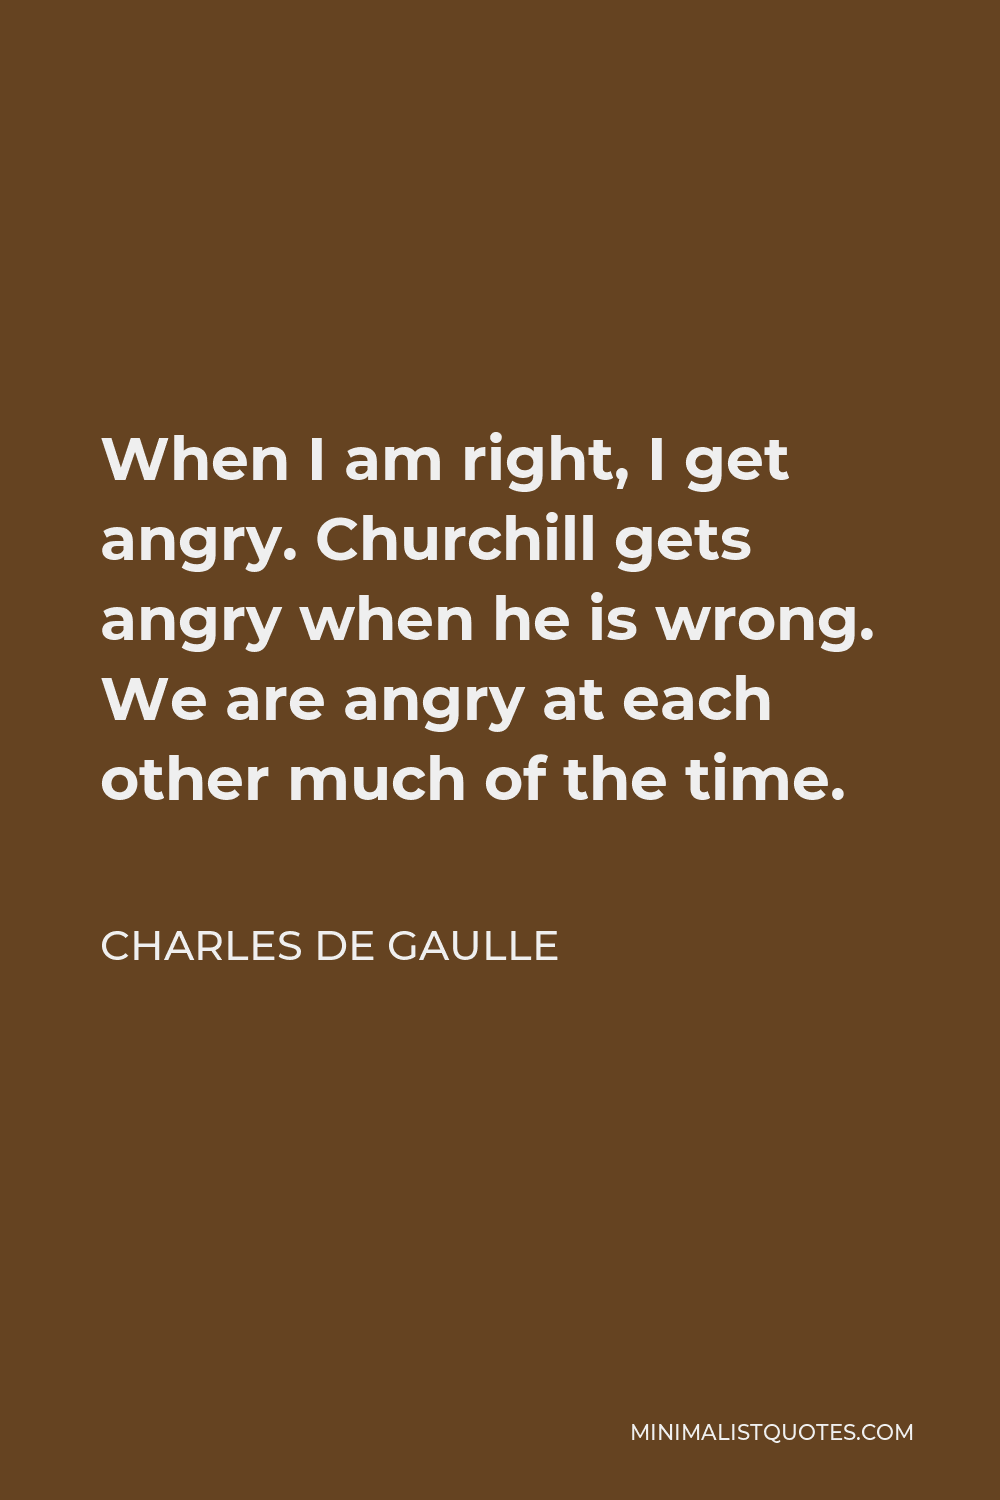 Charles de Gaulle Quote - When I am right, I get angry. Churchill gets angry when he is wrong. We are angry at each other much of the time.